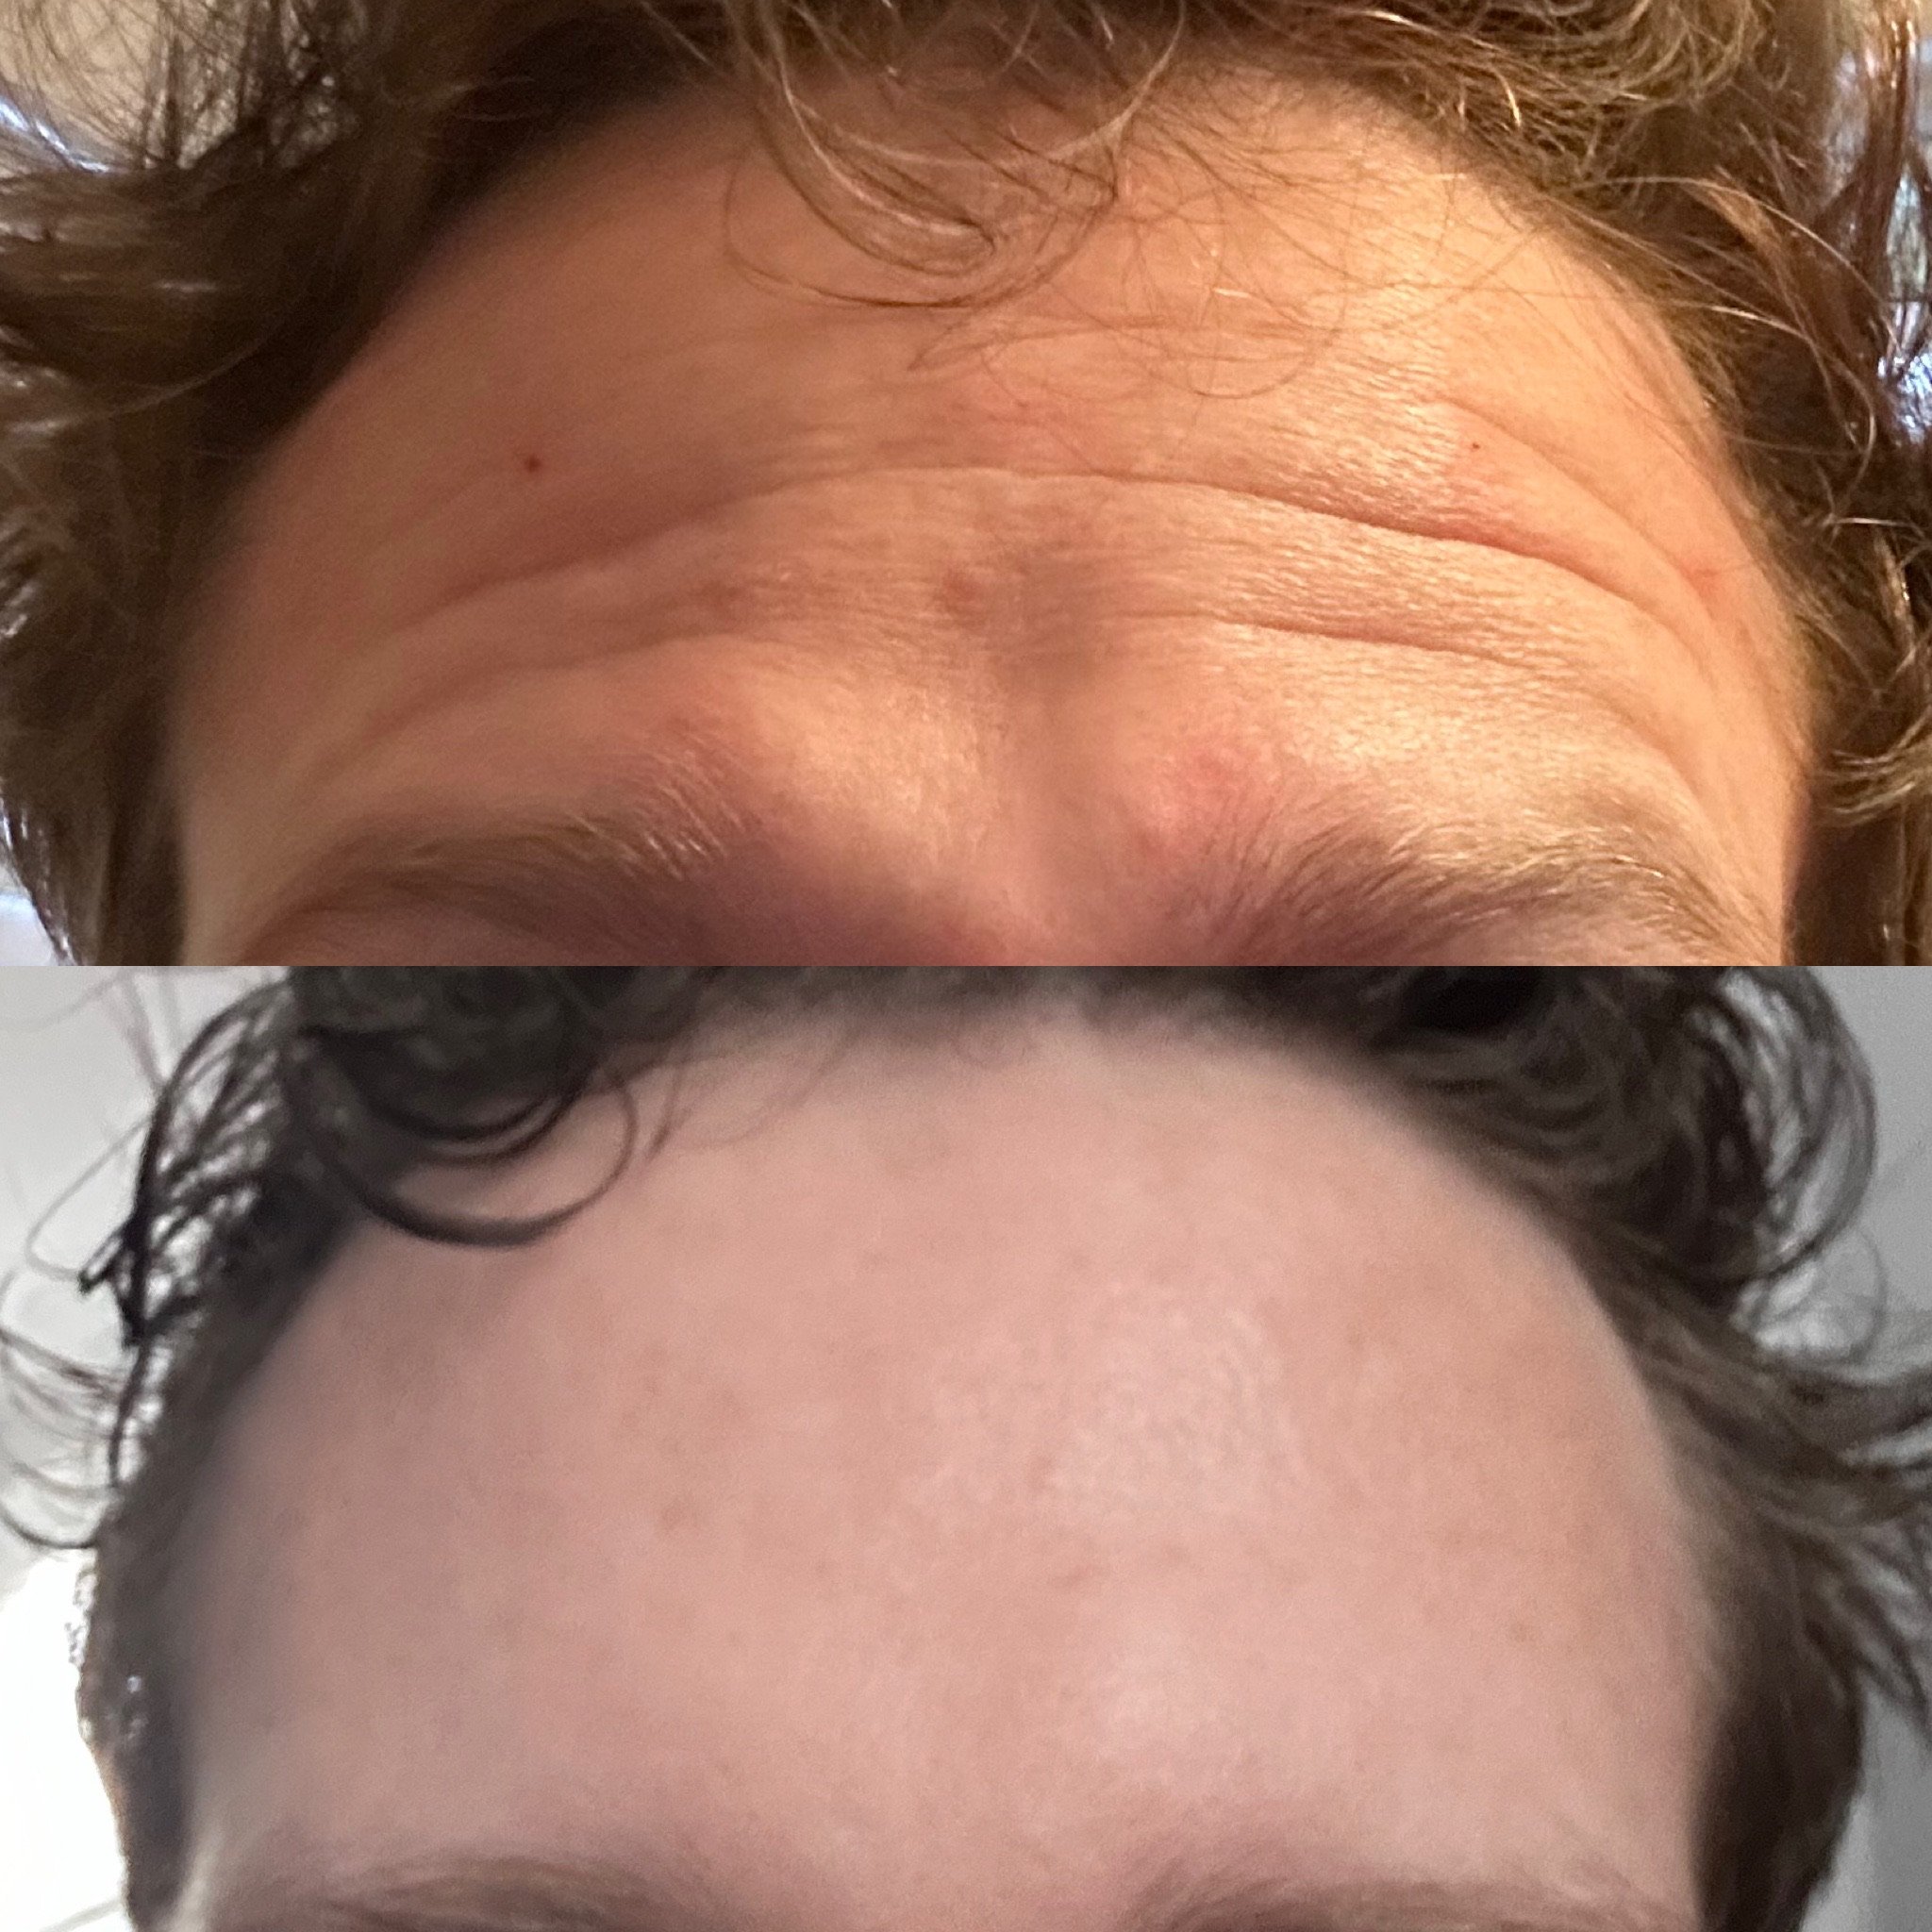 Male Botox - Forehead and 11's